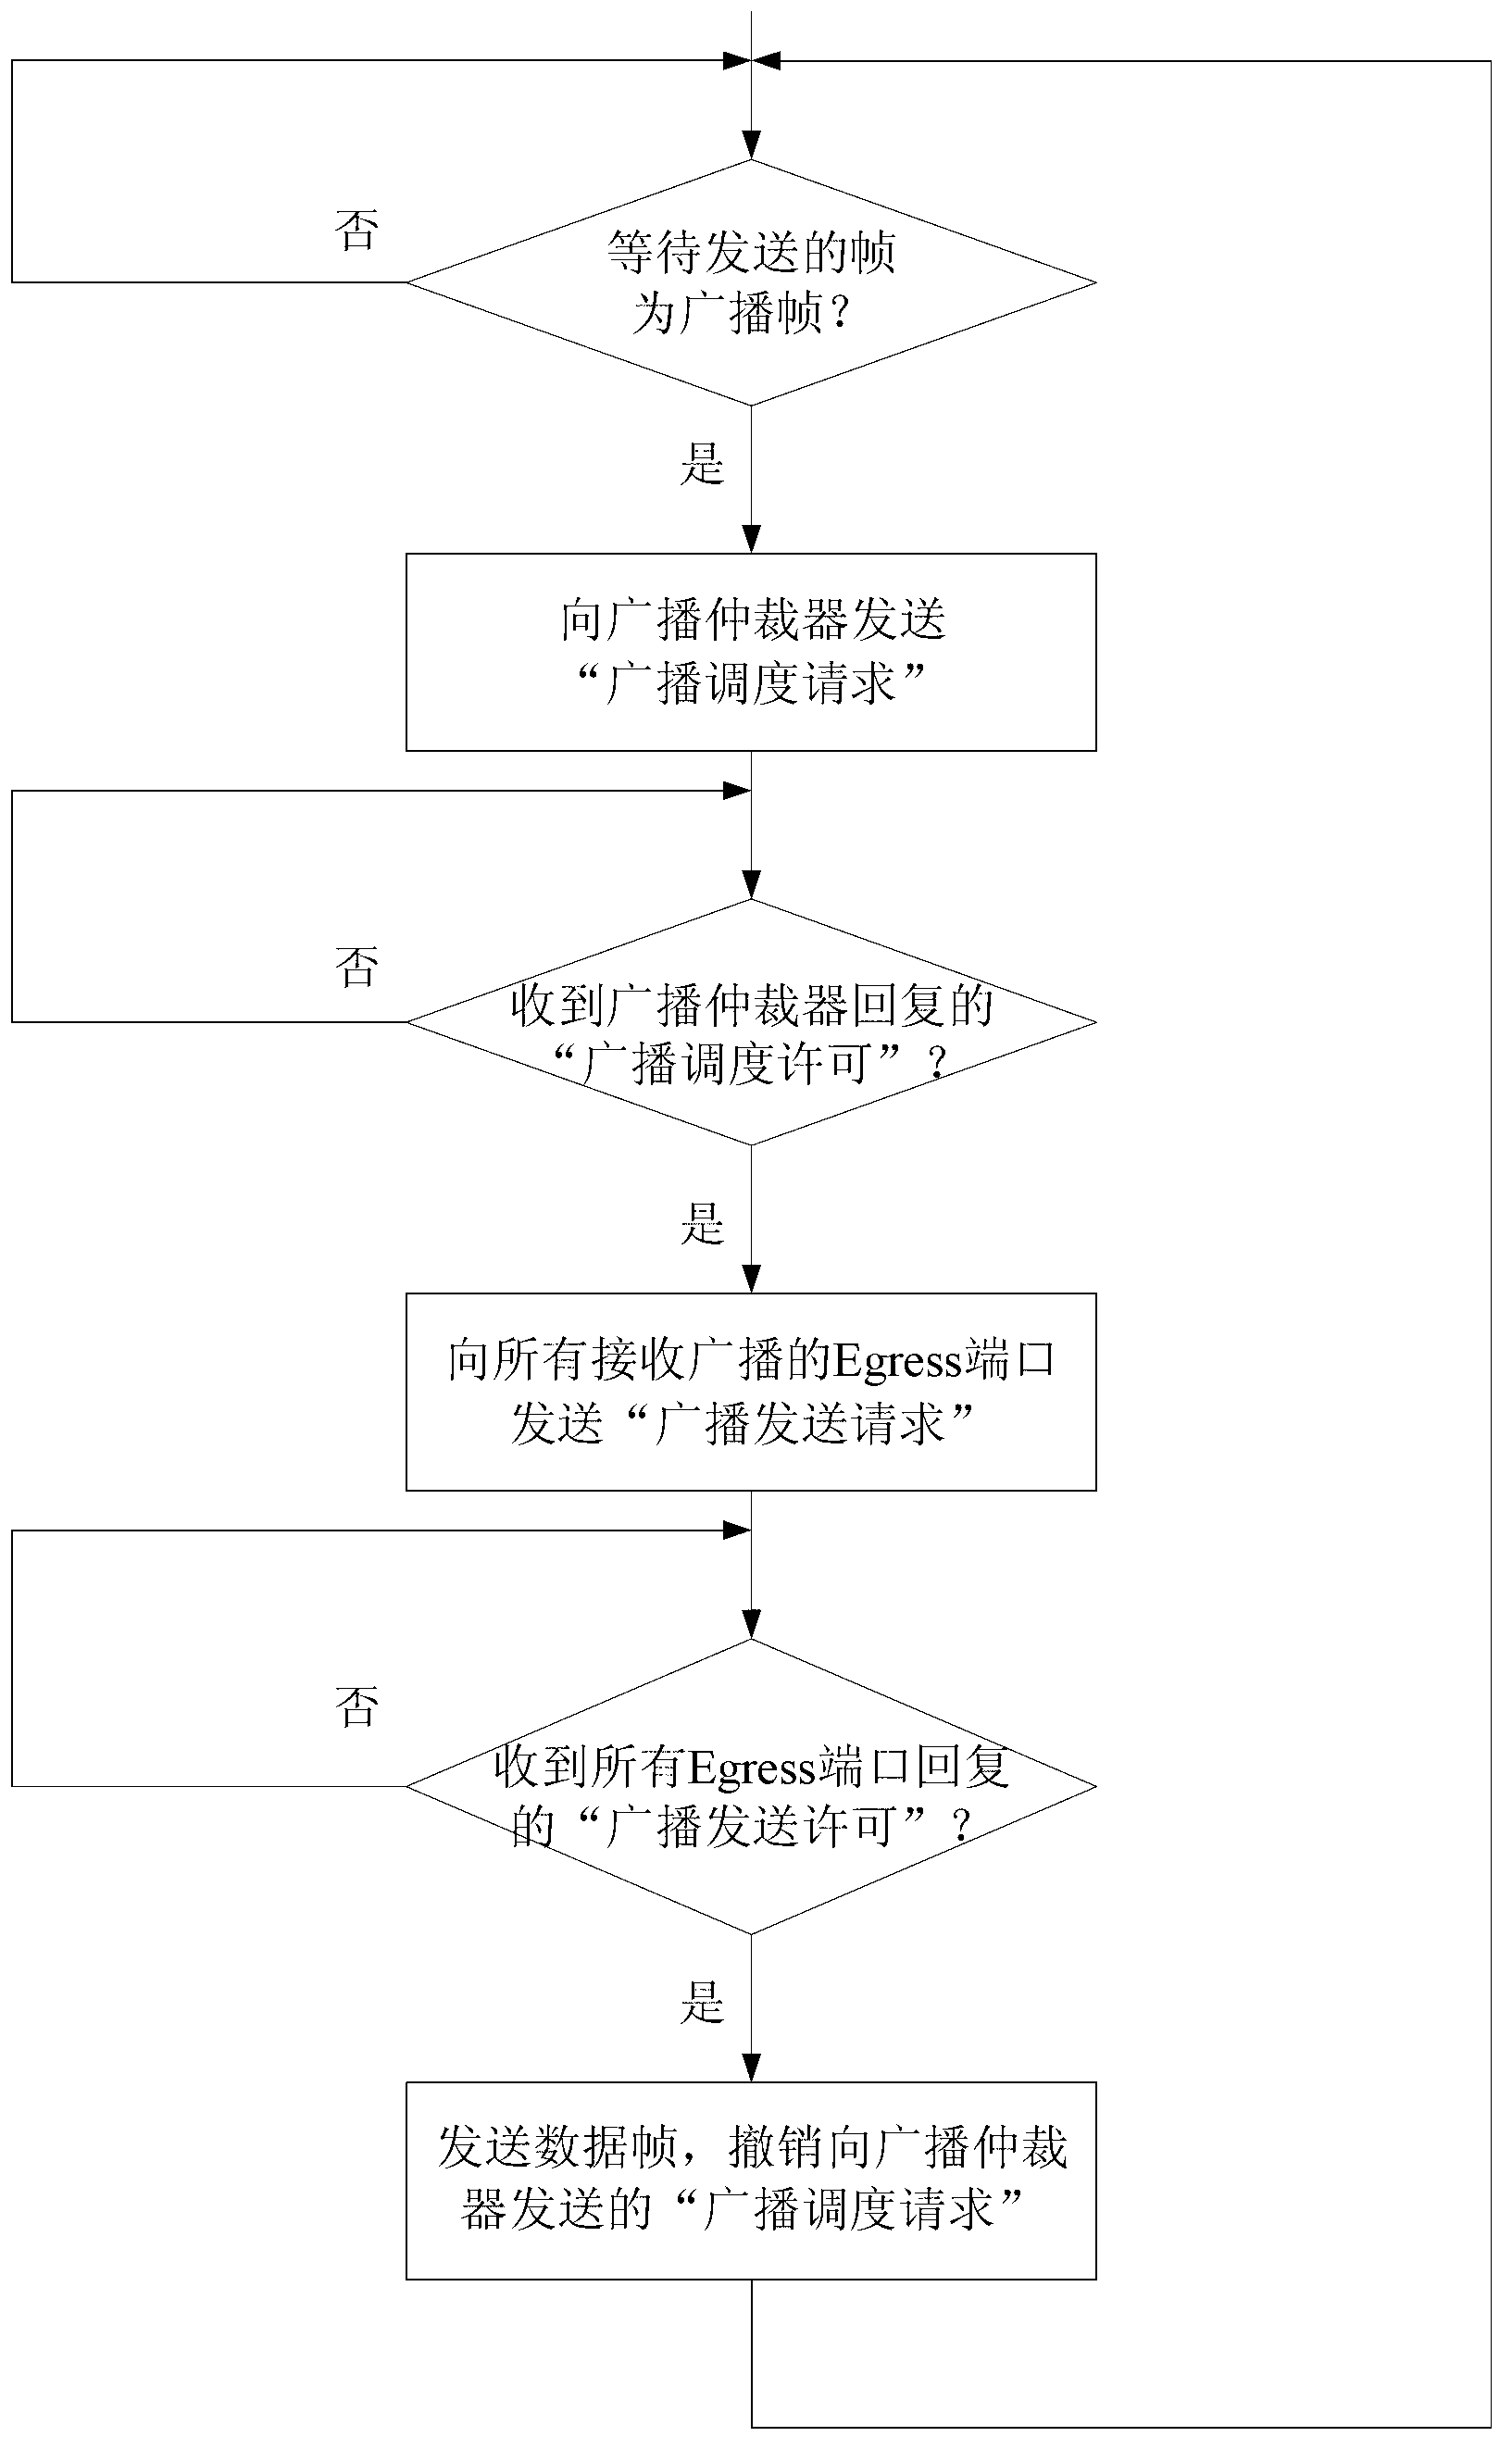 Switching network based broadcast scheduling method